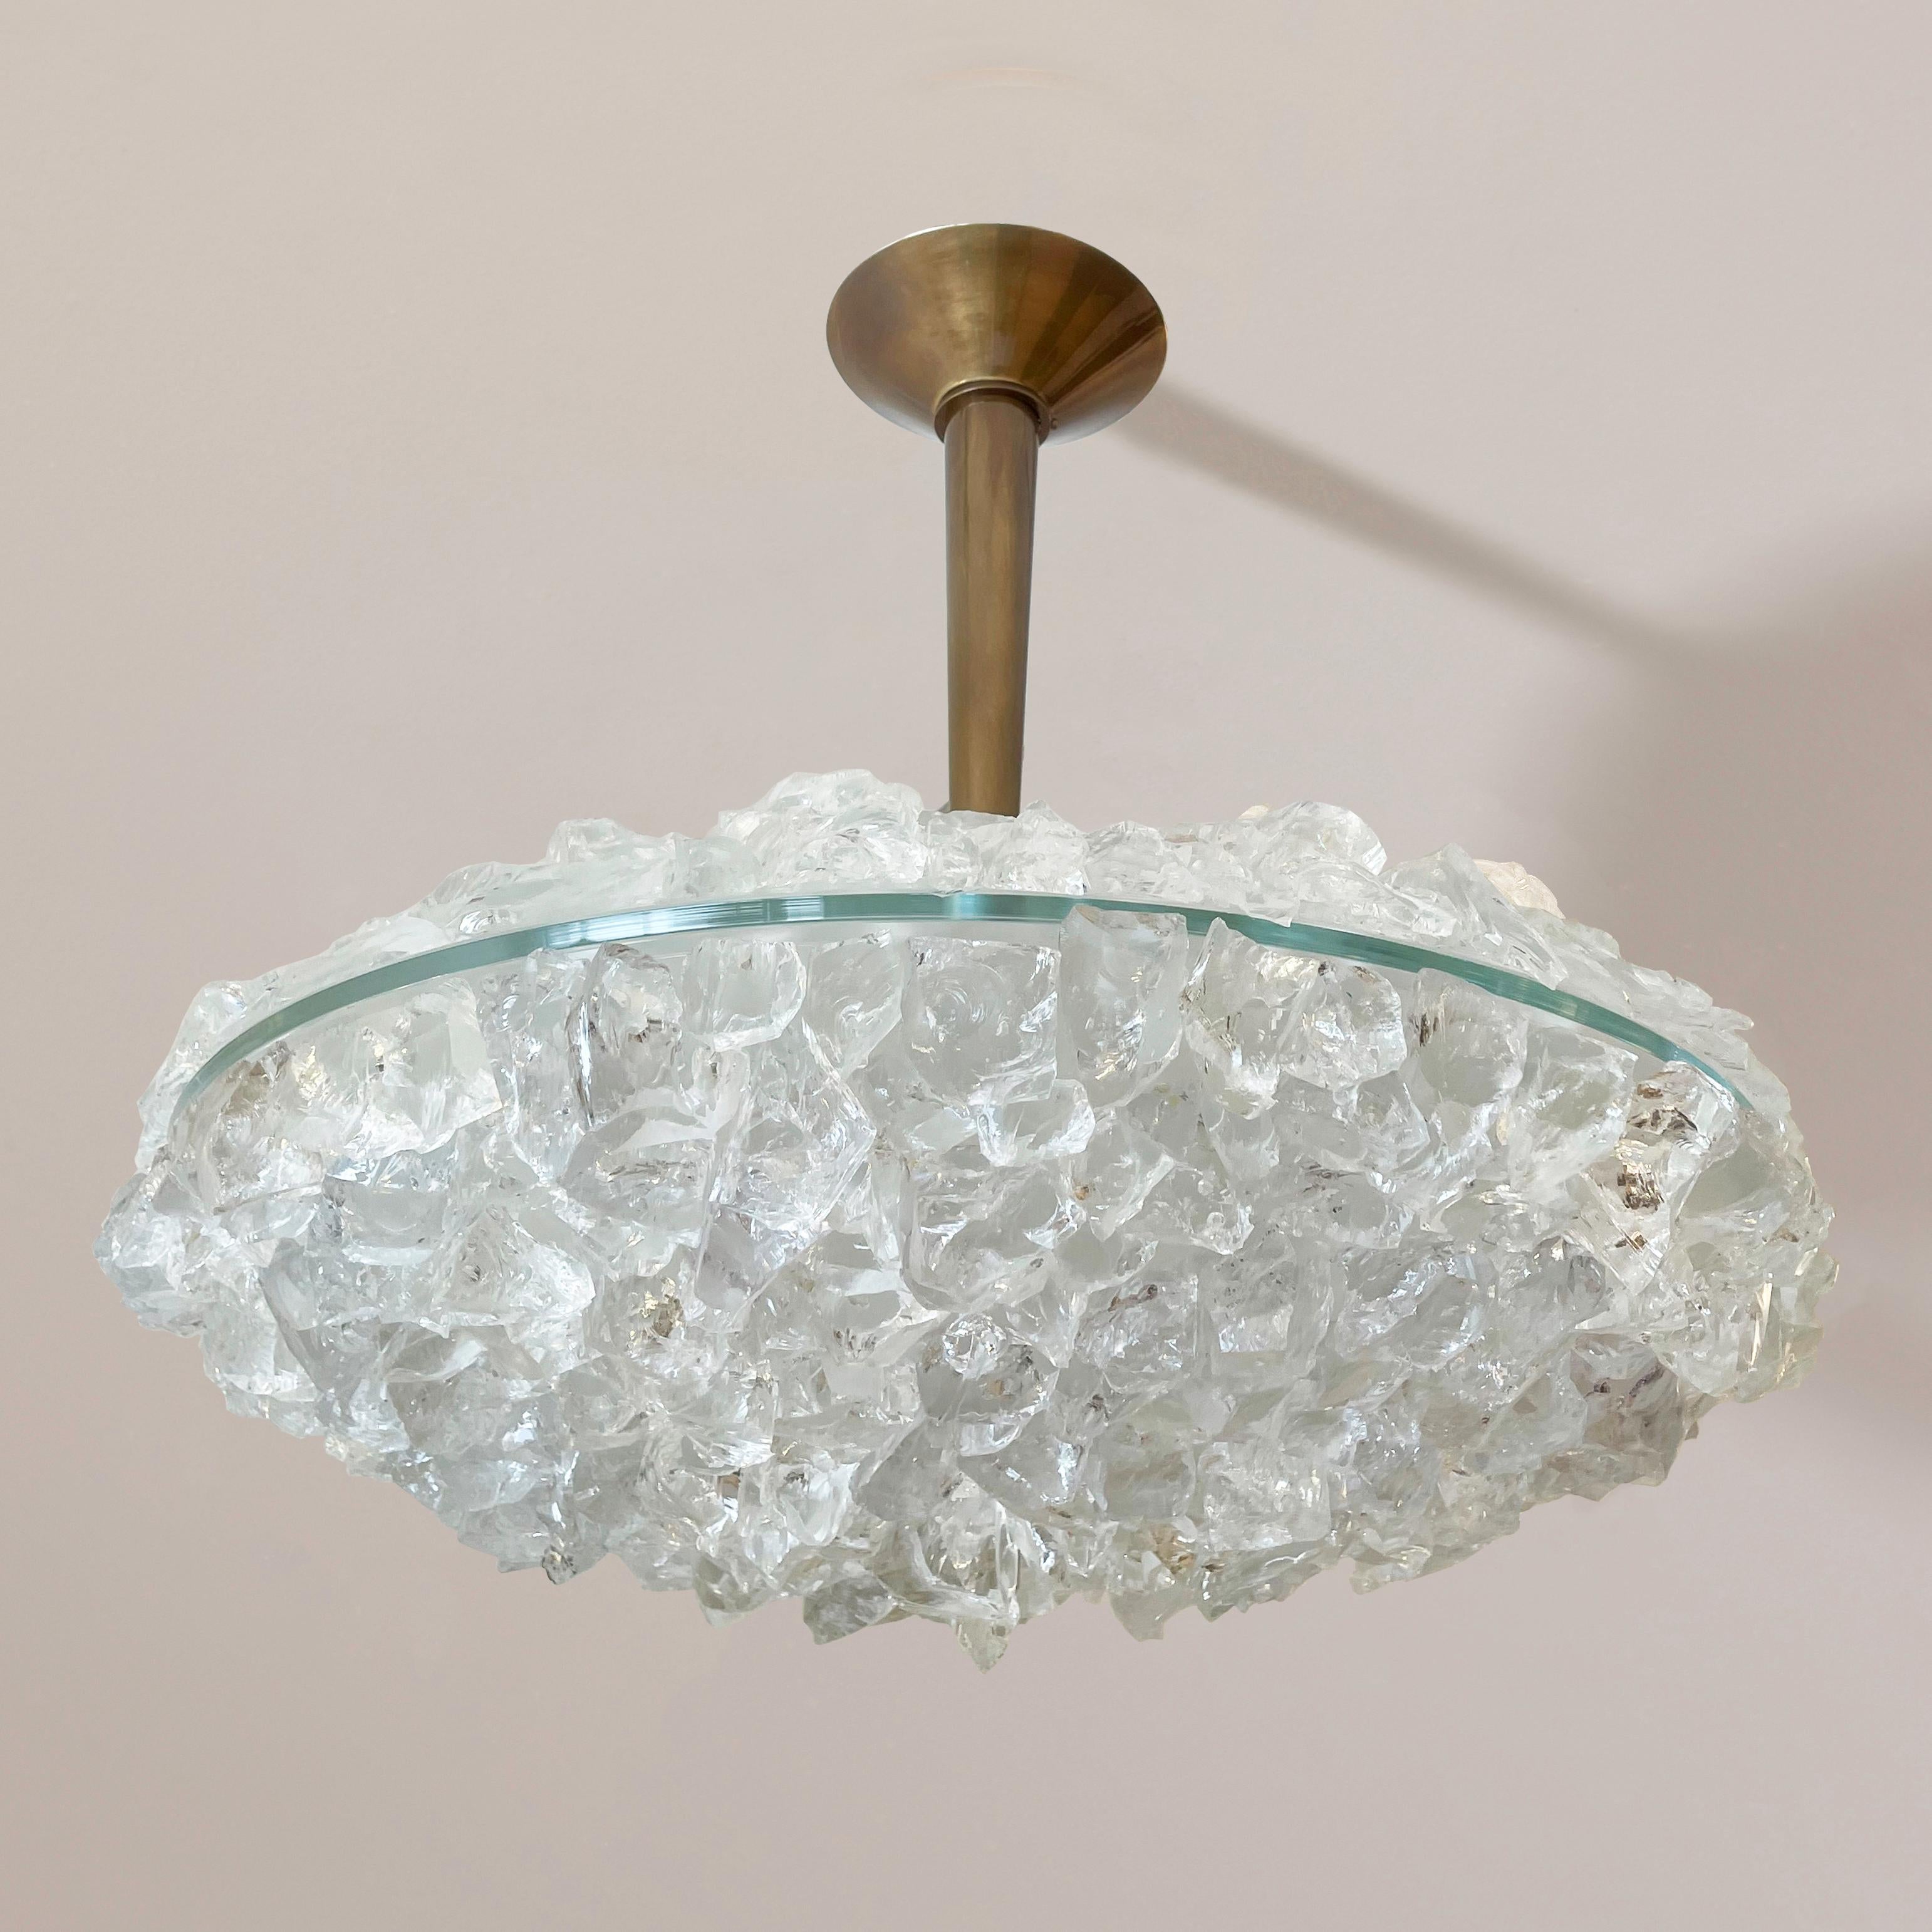 Contemporary Matera Grande Ceiling Light by Gaspare Asaro-Polished Nickel Finish For Sale